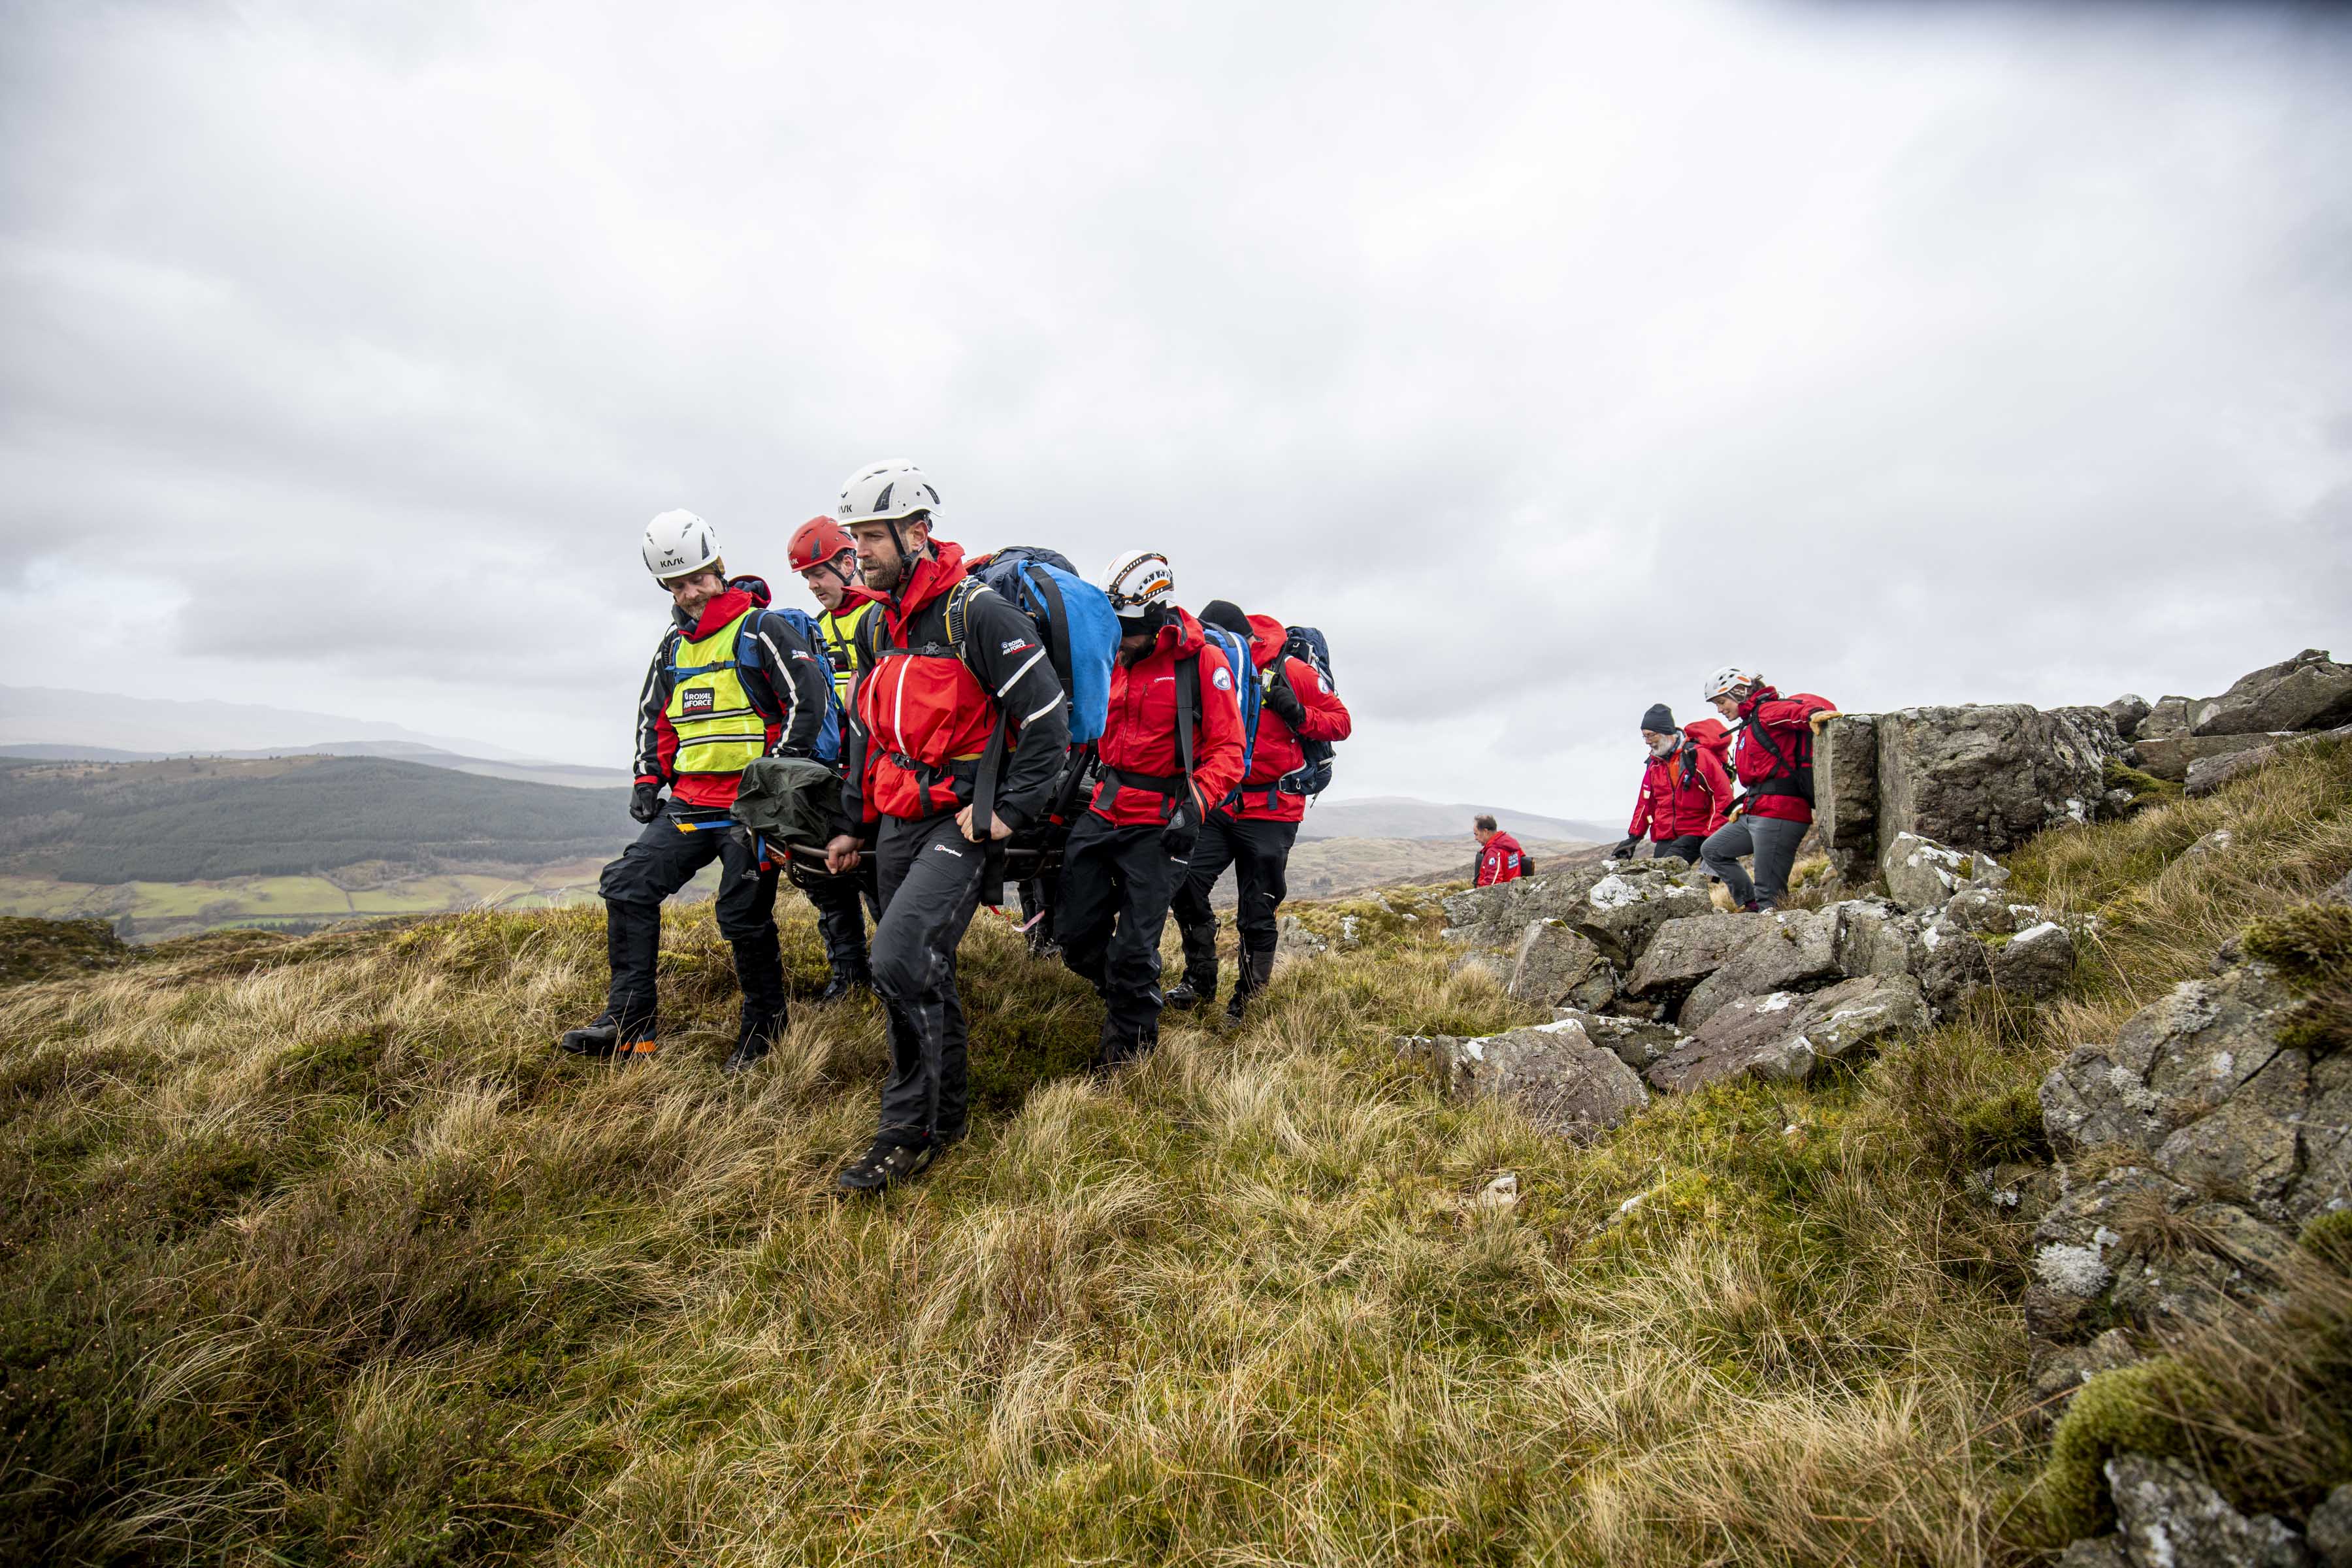 Image shows Search and Rescue team on mountain.